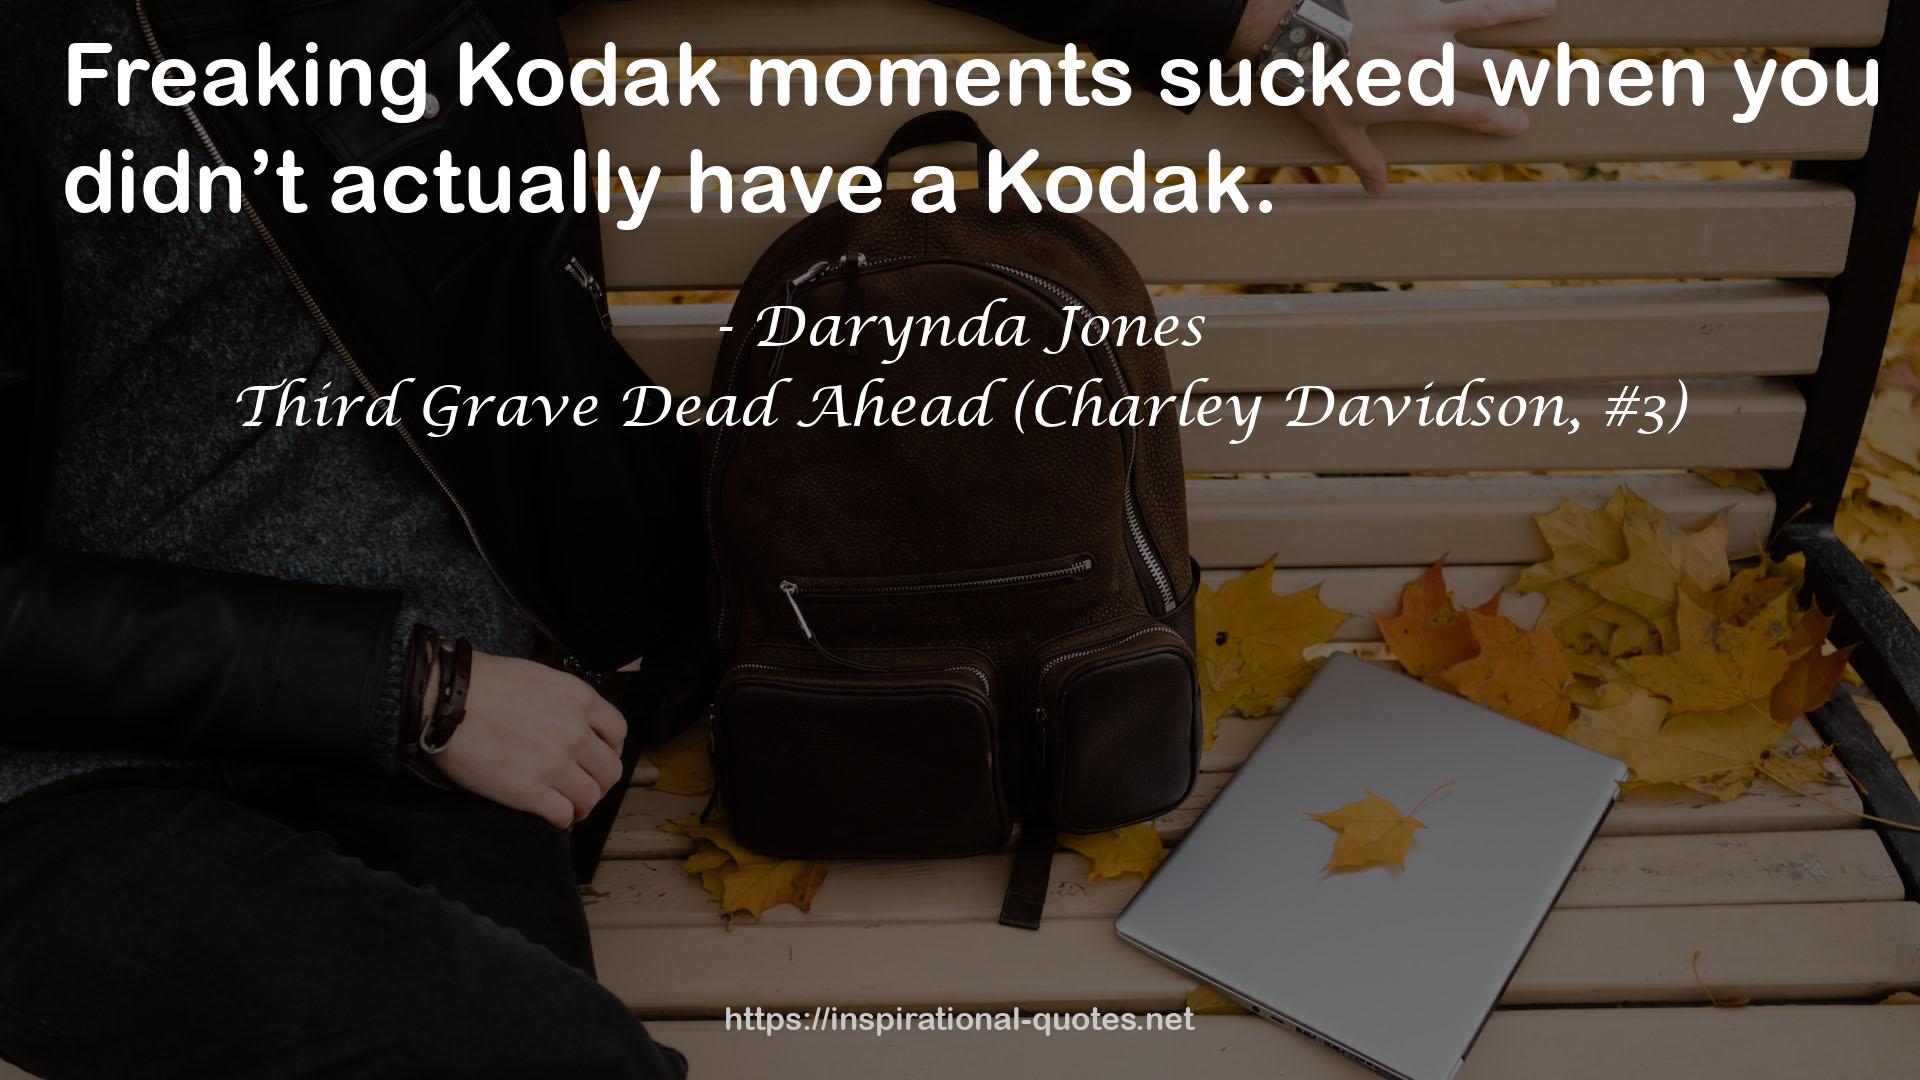 Third Grave Dead Ahead (Charley Davidson, #3) QUOTES